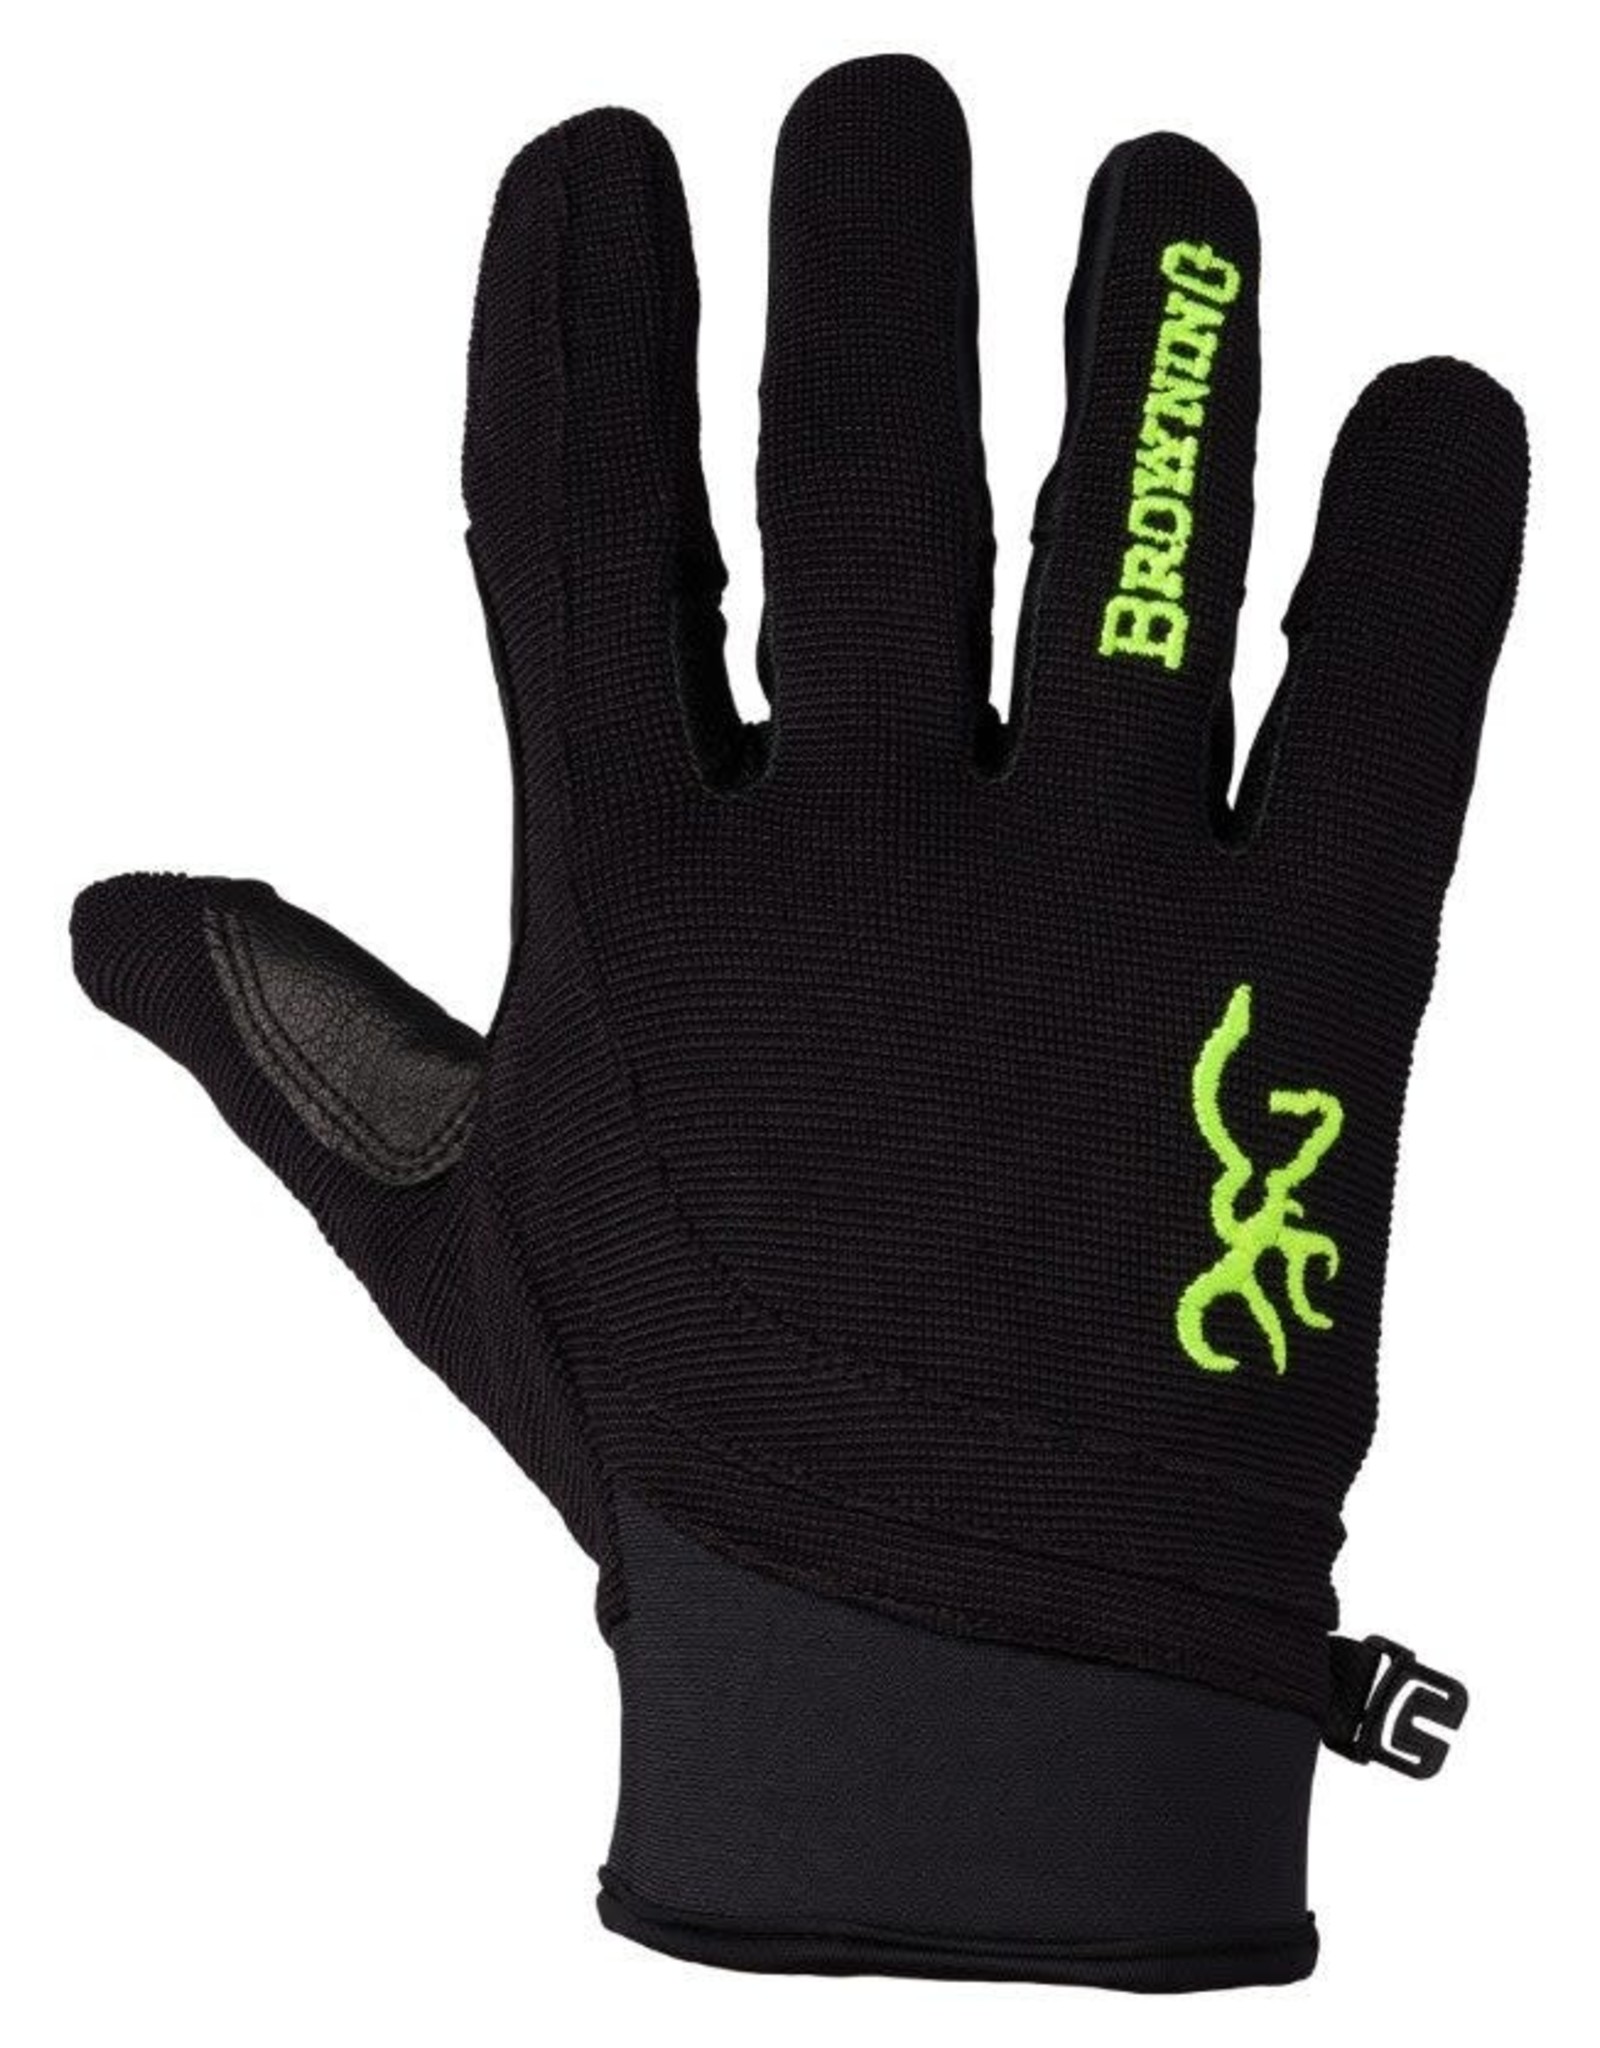 Browning Ace Shooting Glove - Volt - 2XL